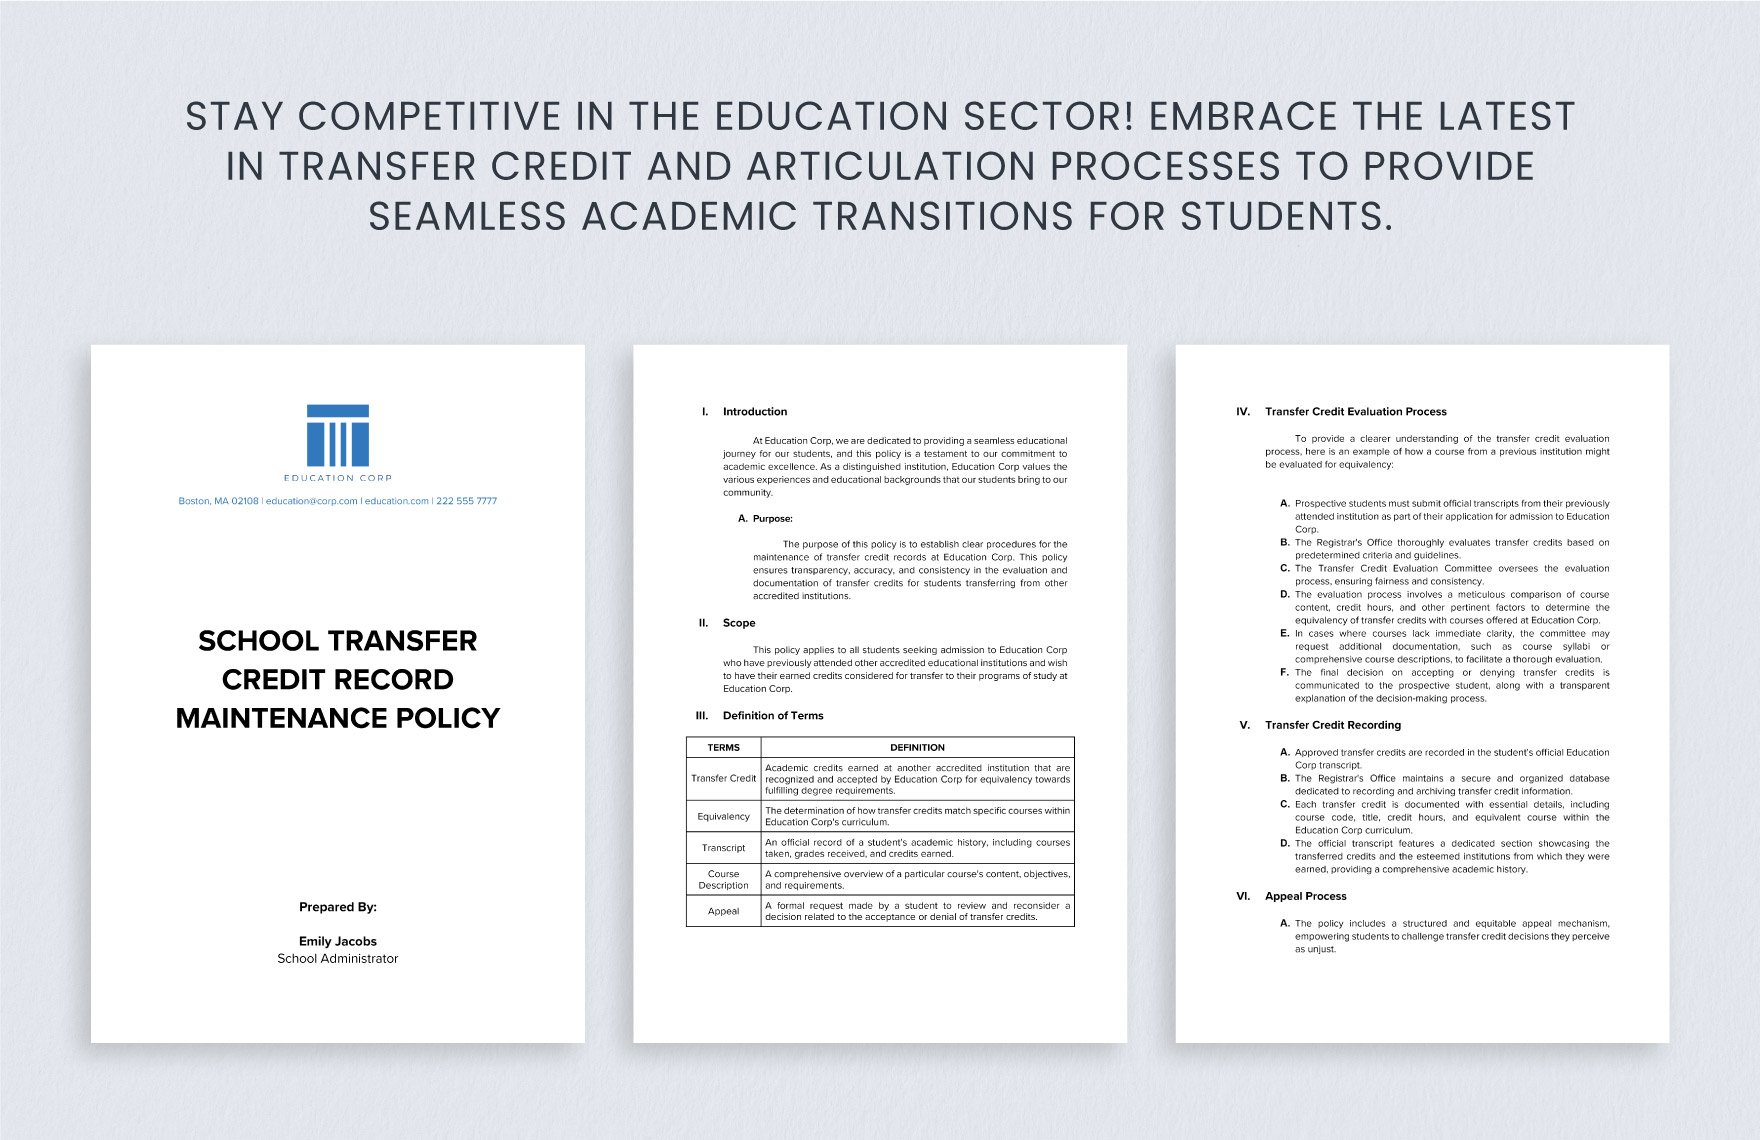 School Transfer Credit Record Maintenance Policy Template